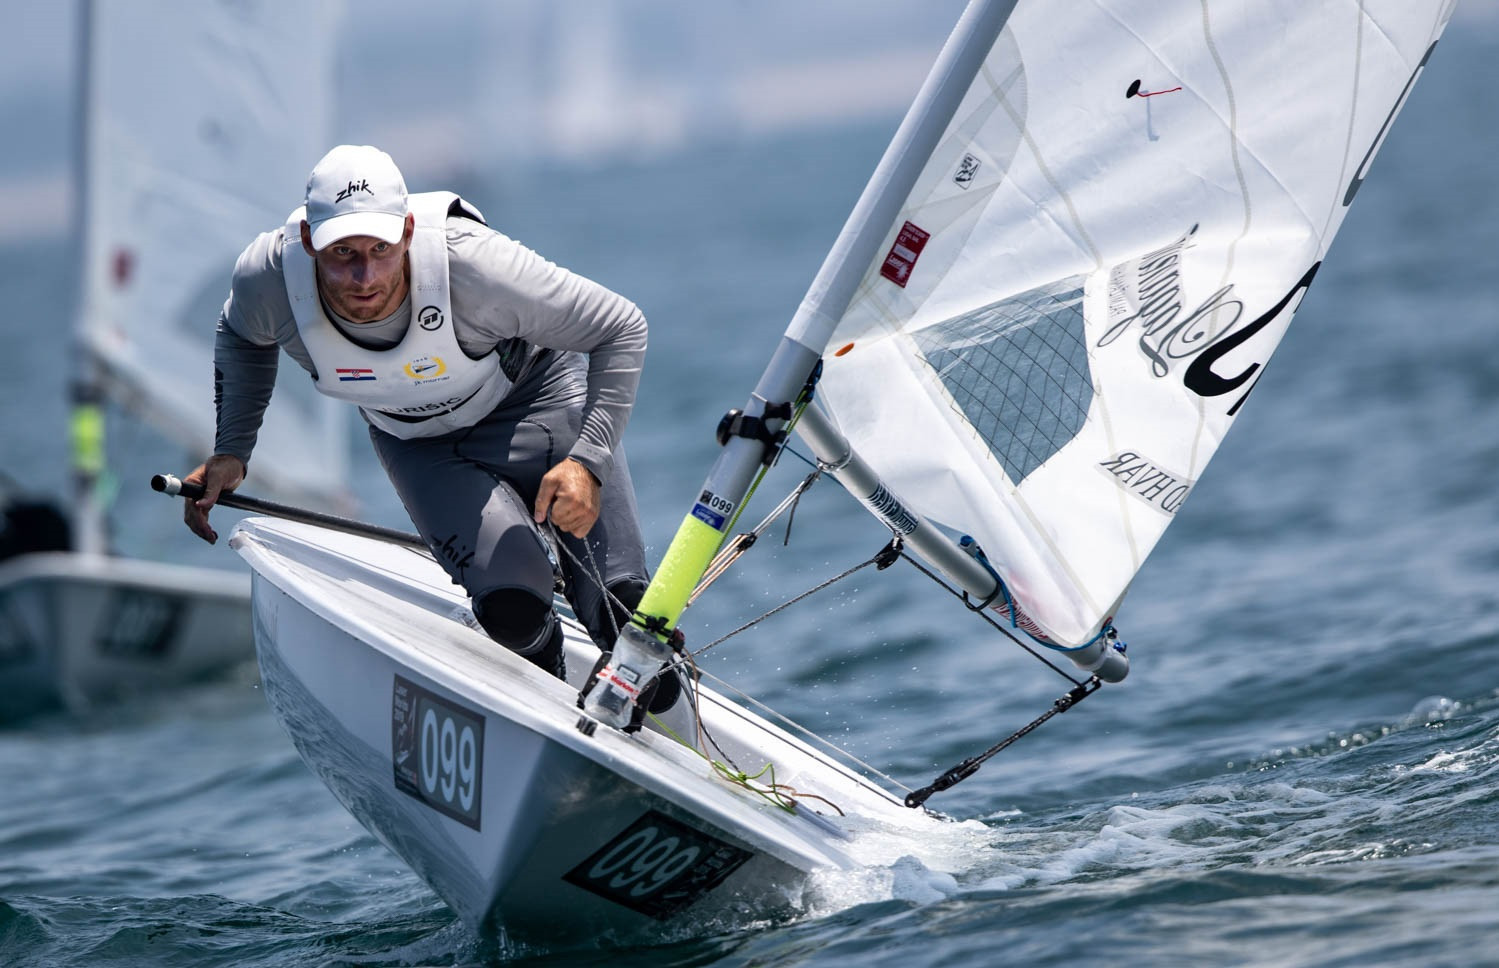 Jurišić and Gautrey tied for lead after day one of Laser Men's World Championship